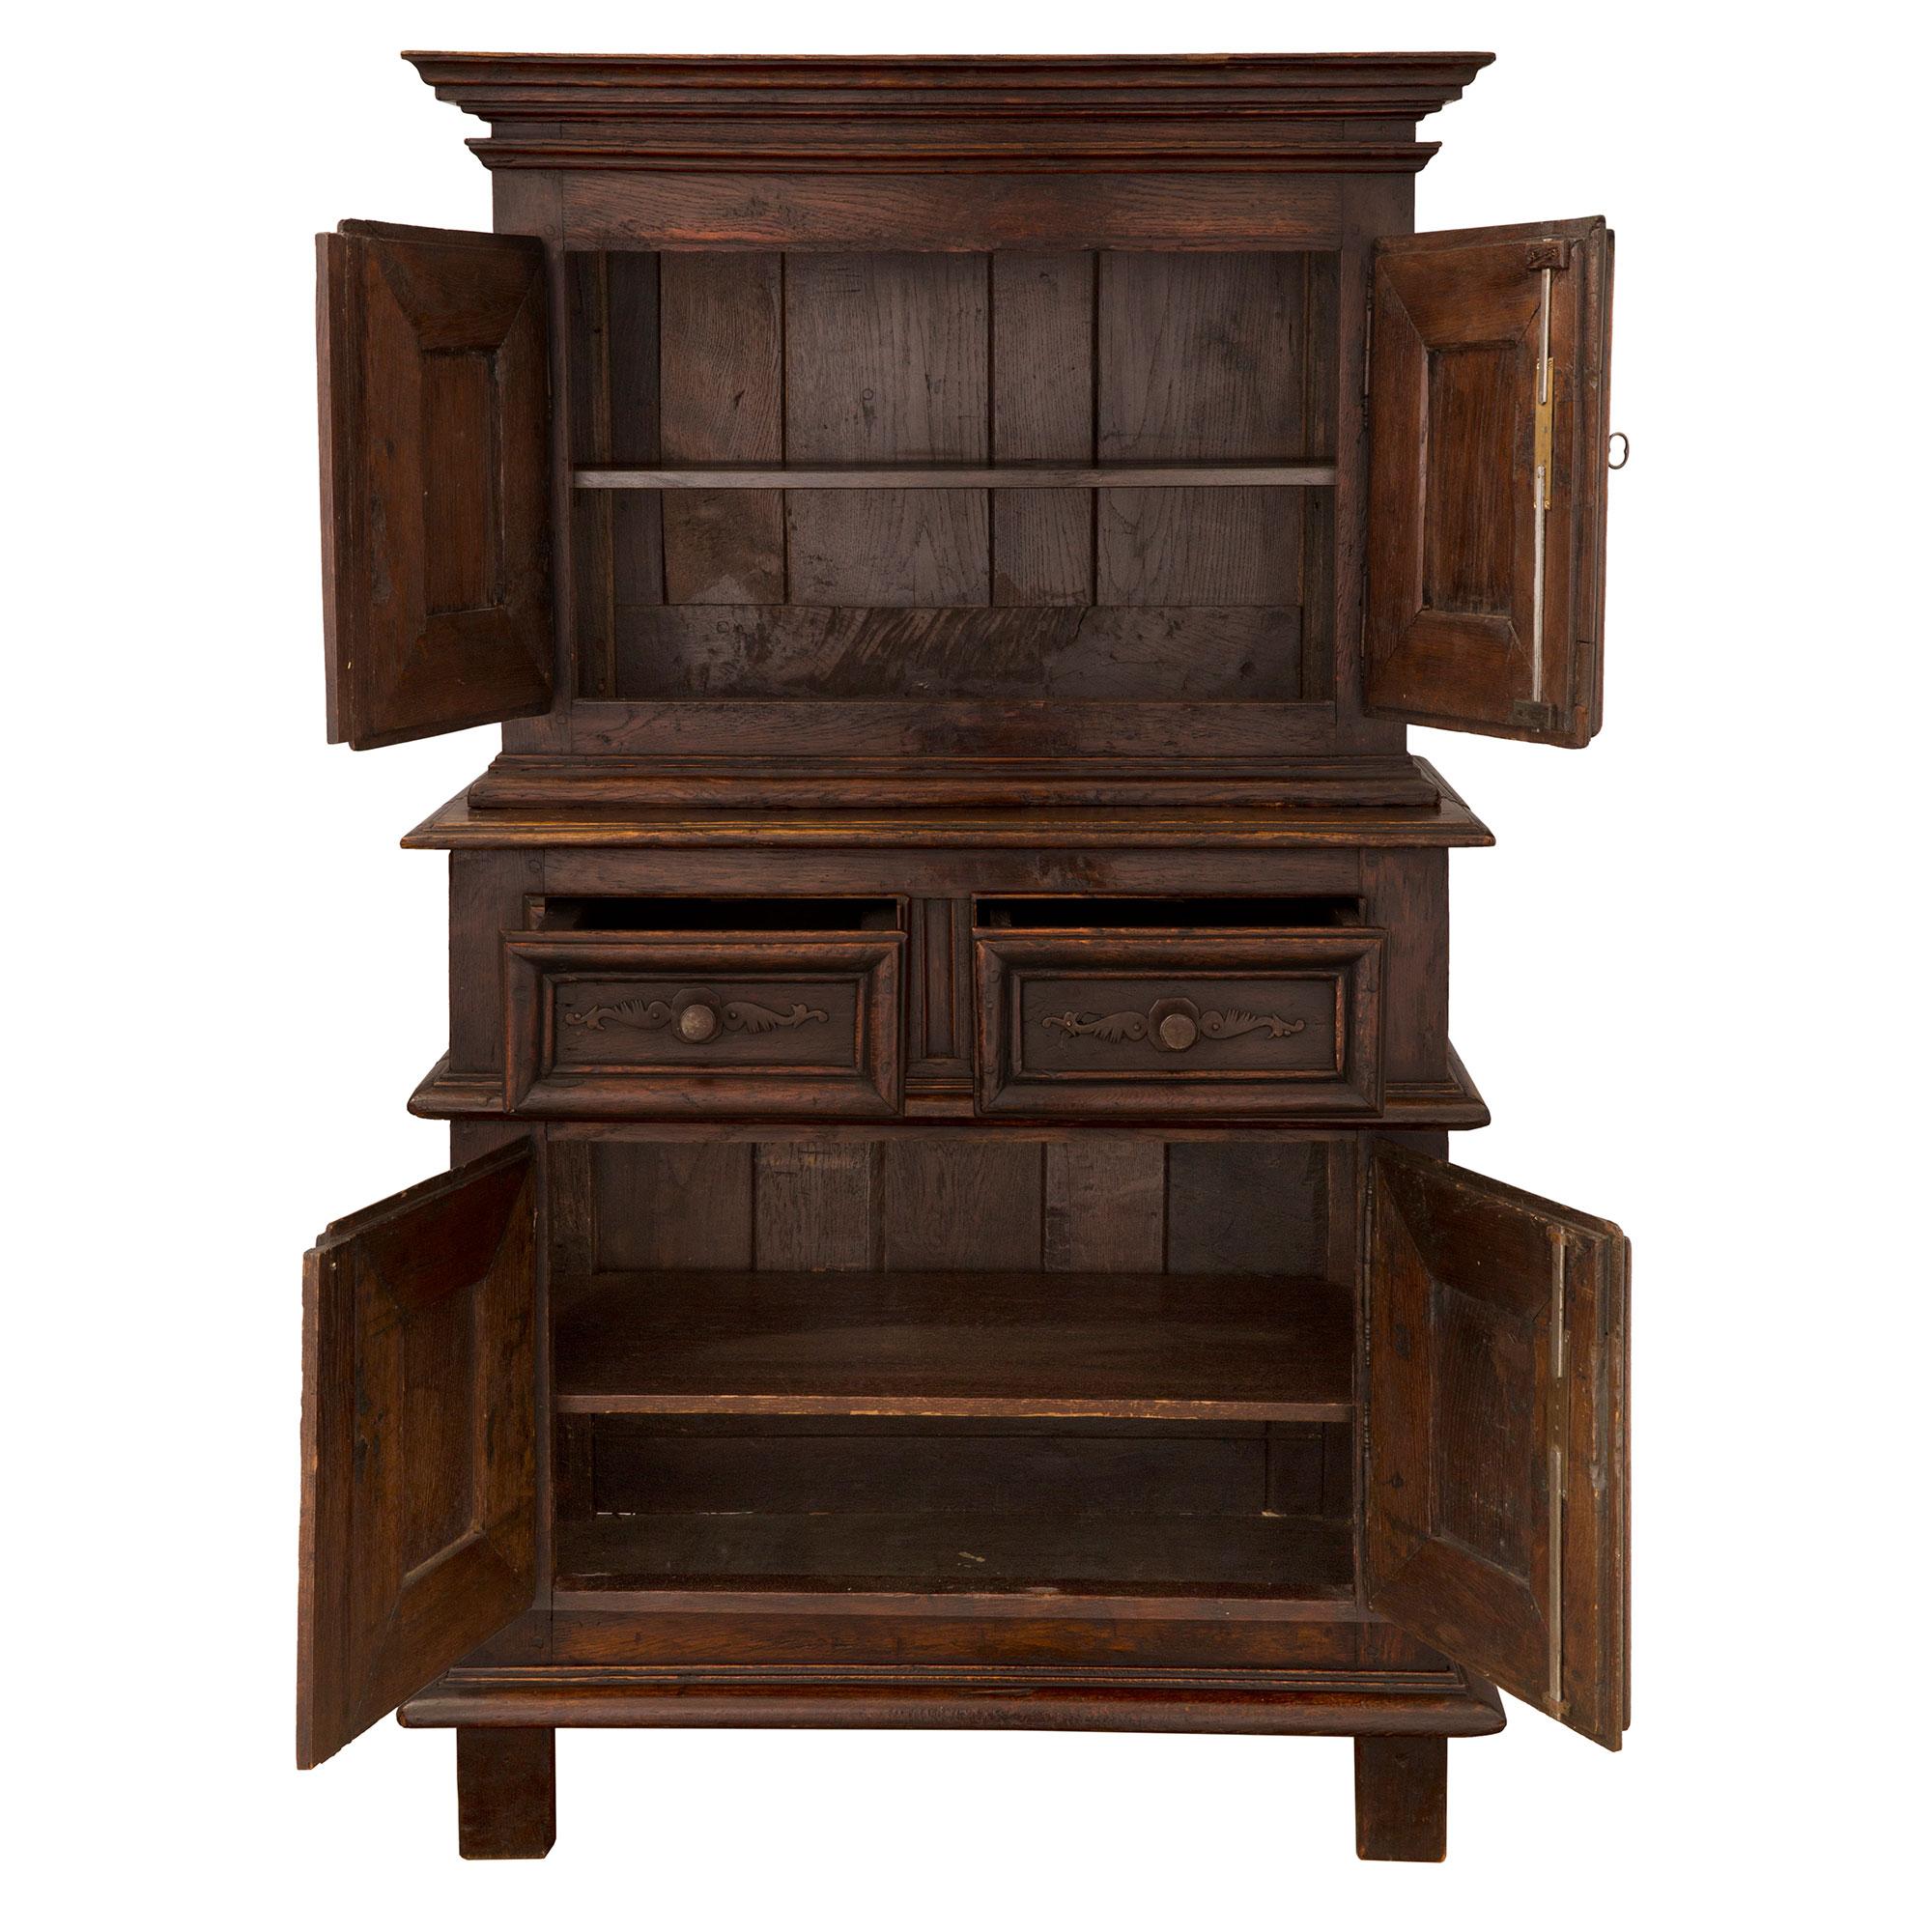 A handsome French 18th century Louis XIII st. oak Deux Corps cabinet. The four door, two drawer cabinet is raised by four rectangular supports below the straight mottled apron. The four doors display impressive and richly carved recessed designs